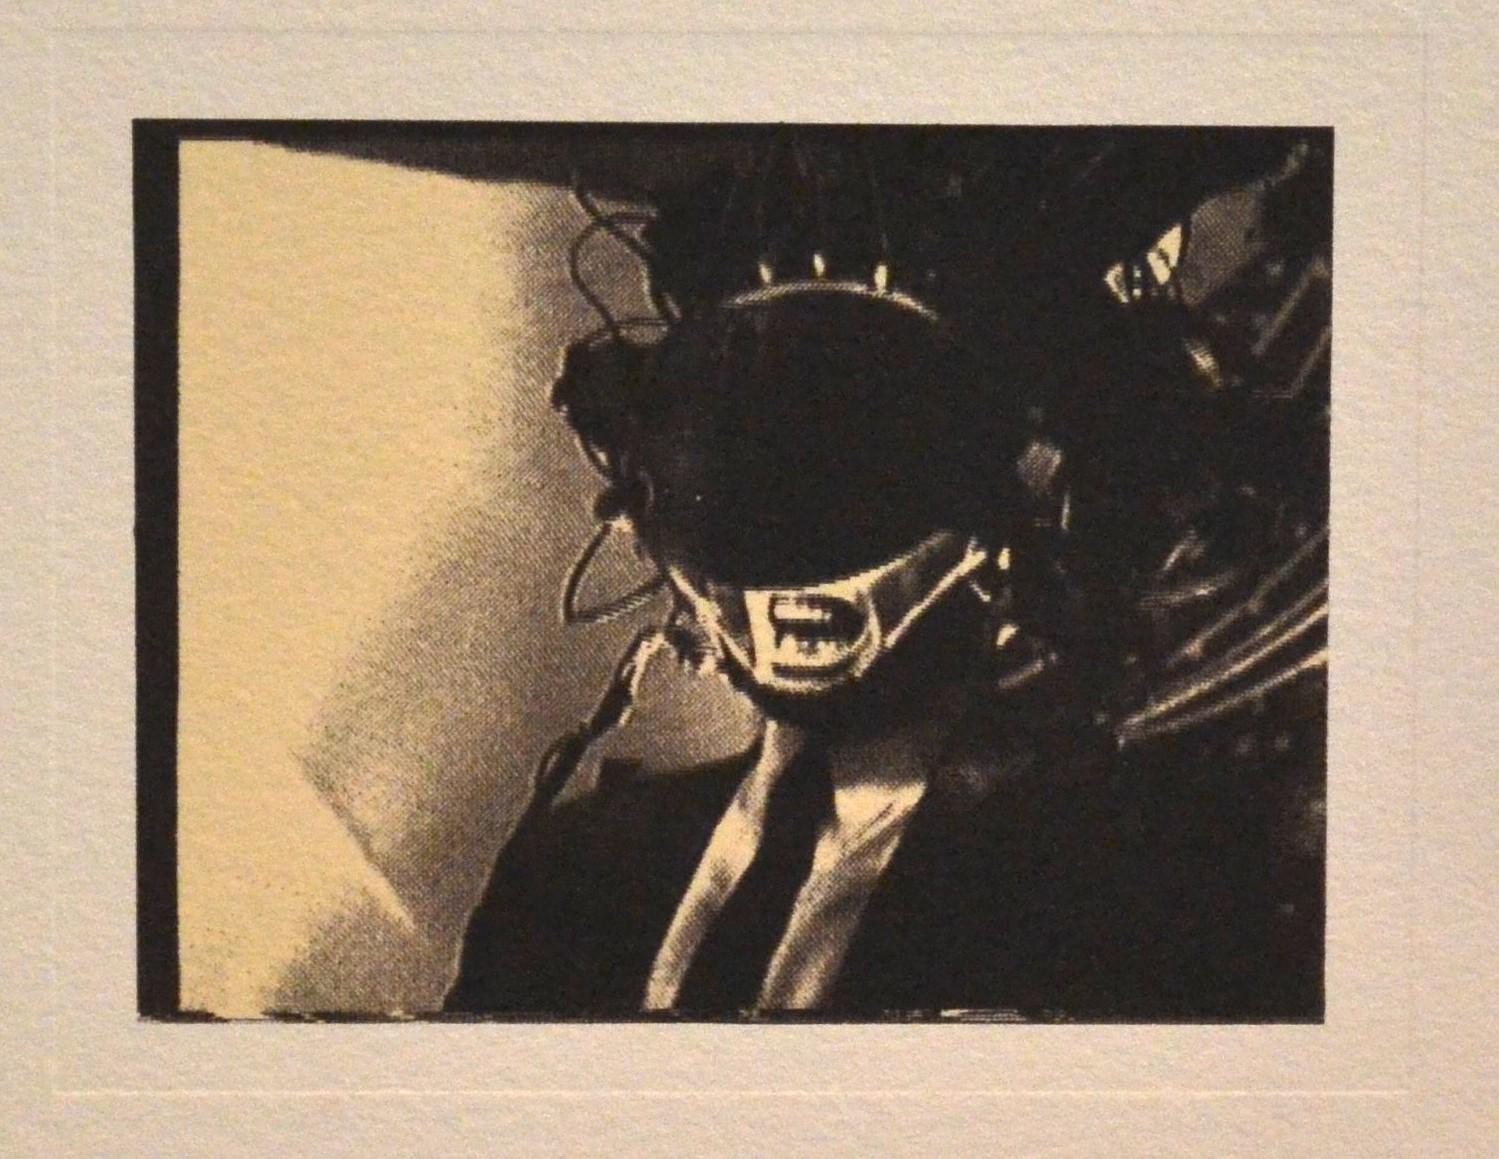 A Single Frame - From the “Mnemonic Pictures Folio” - Photolithograph by R.Longo